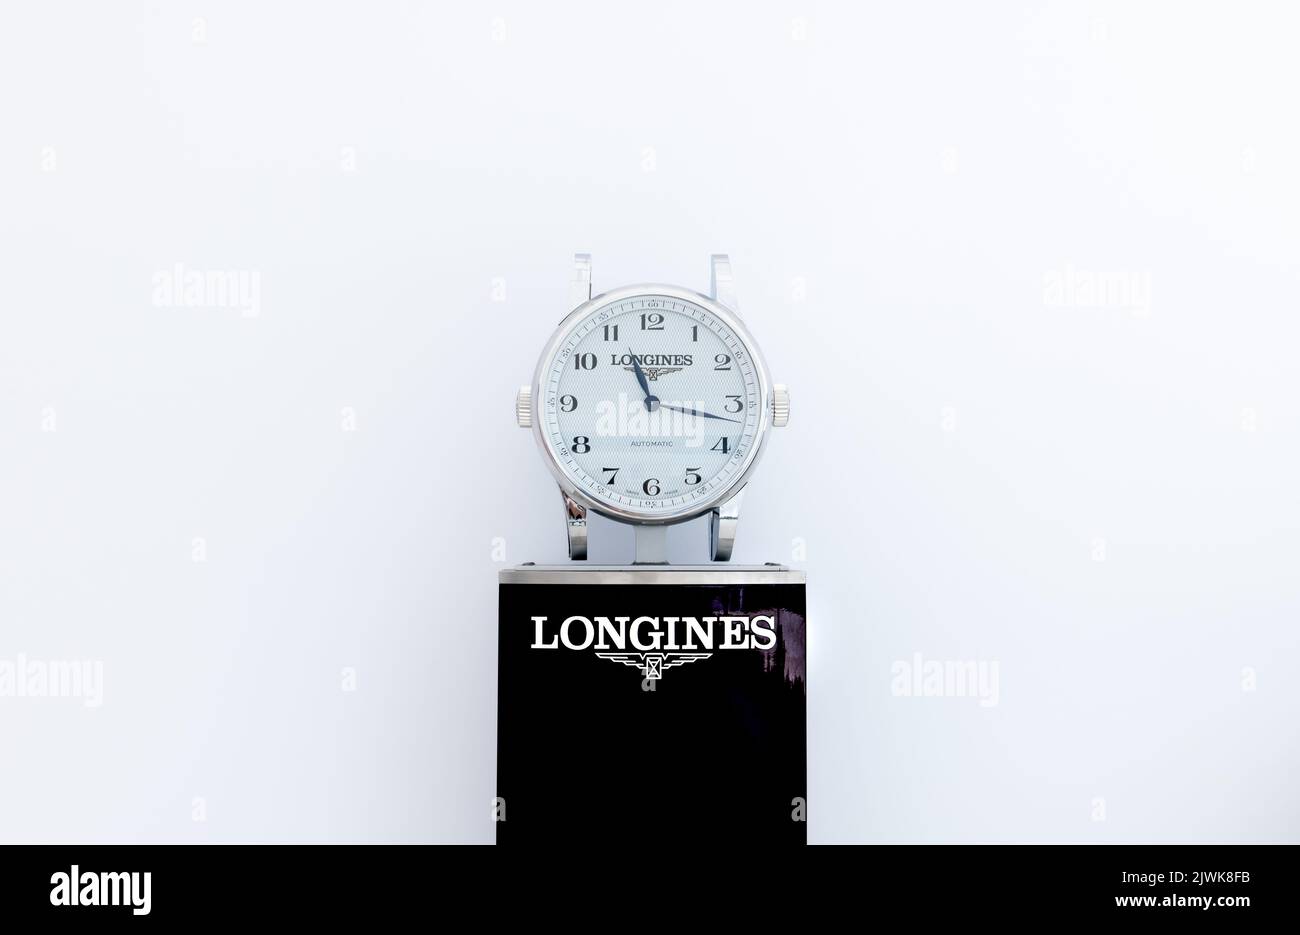 Longines classic style watch in showroom against white background. Rome, Italy, august 31 2022 Global Champions Tour Stock Photo